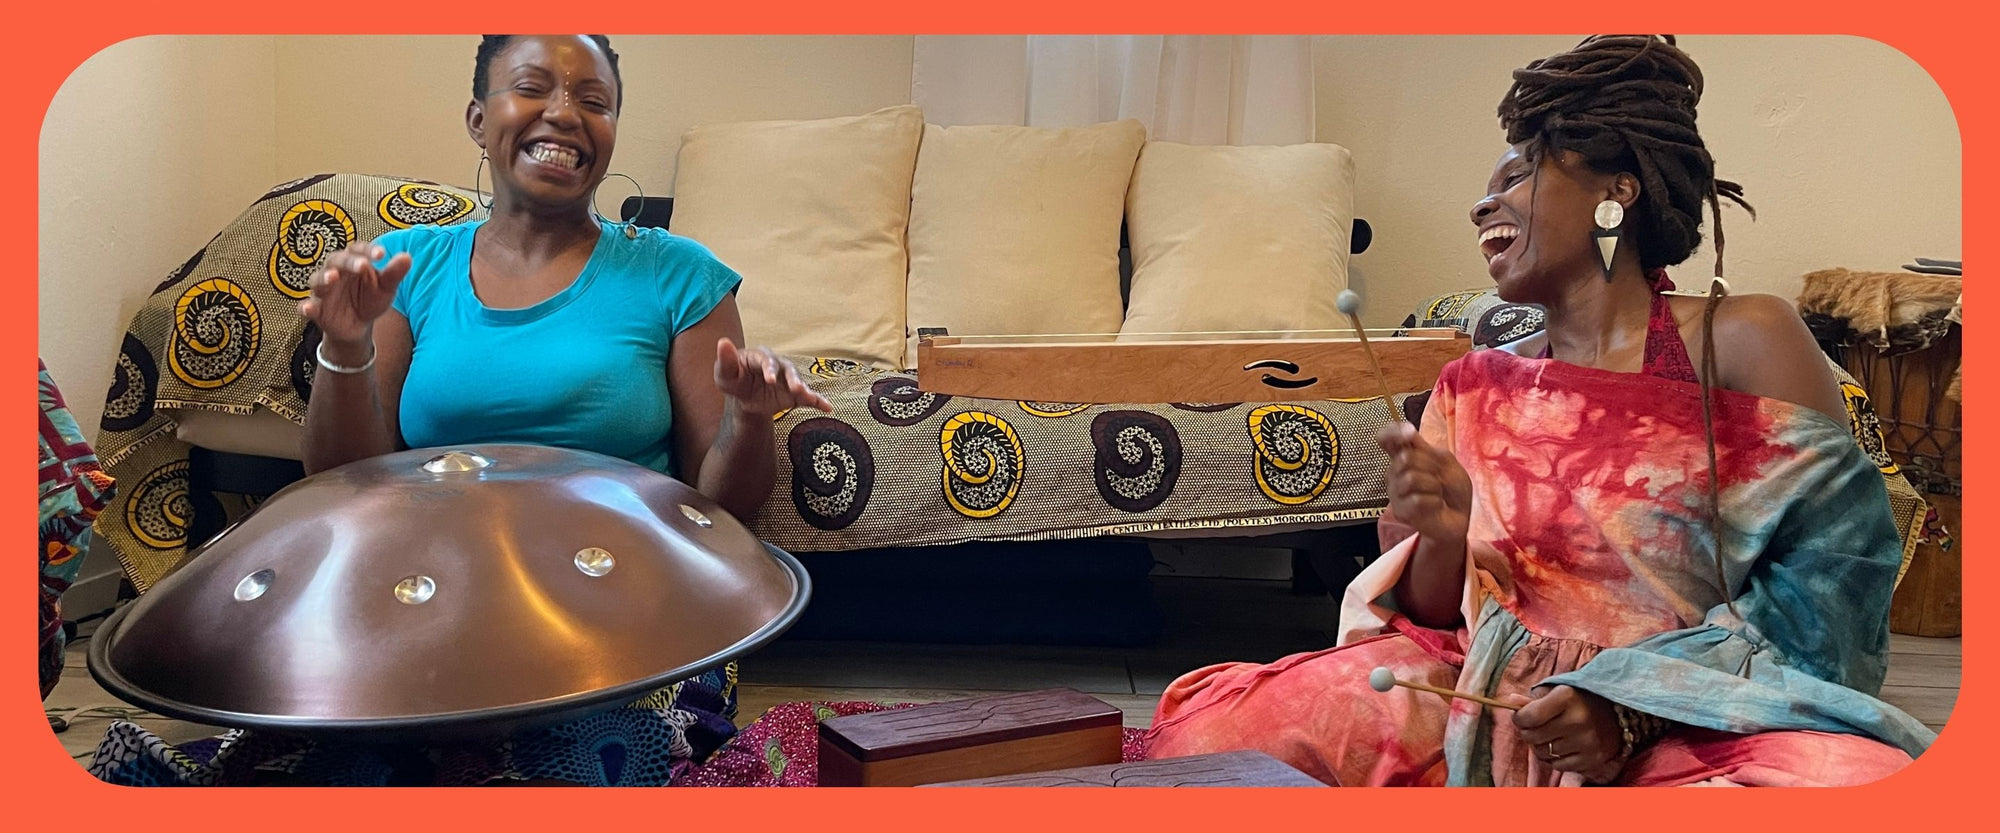 Women laughing and jamming with Metal Sound Spacedrum and feetone wooden tongue drums | weplaywelltogether